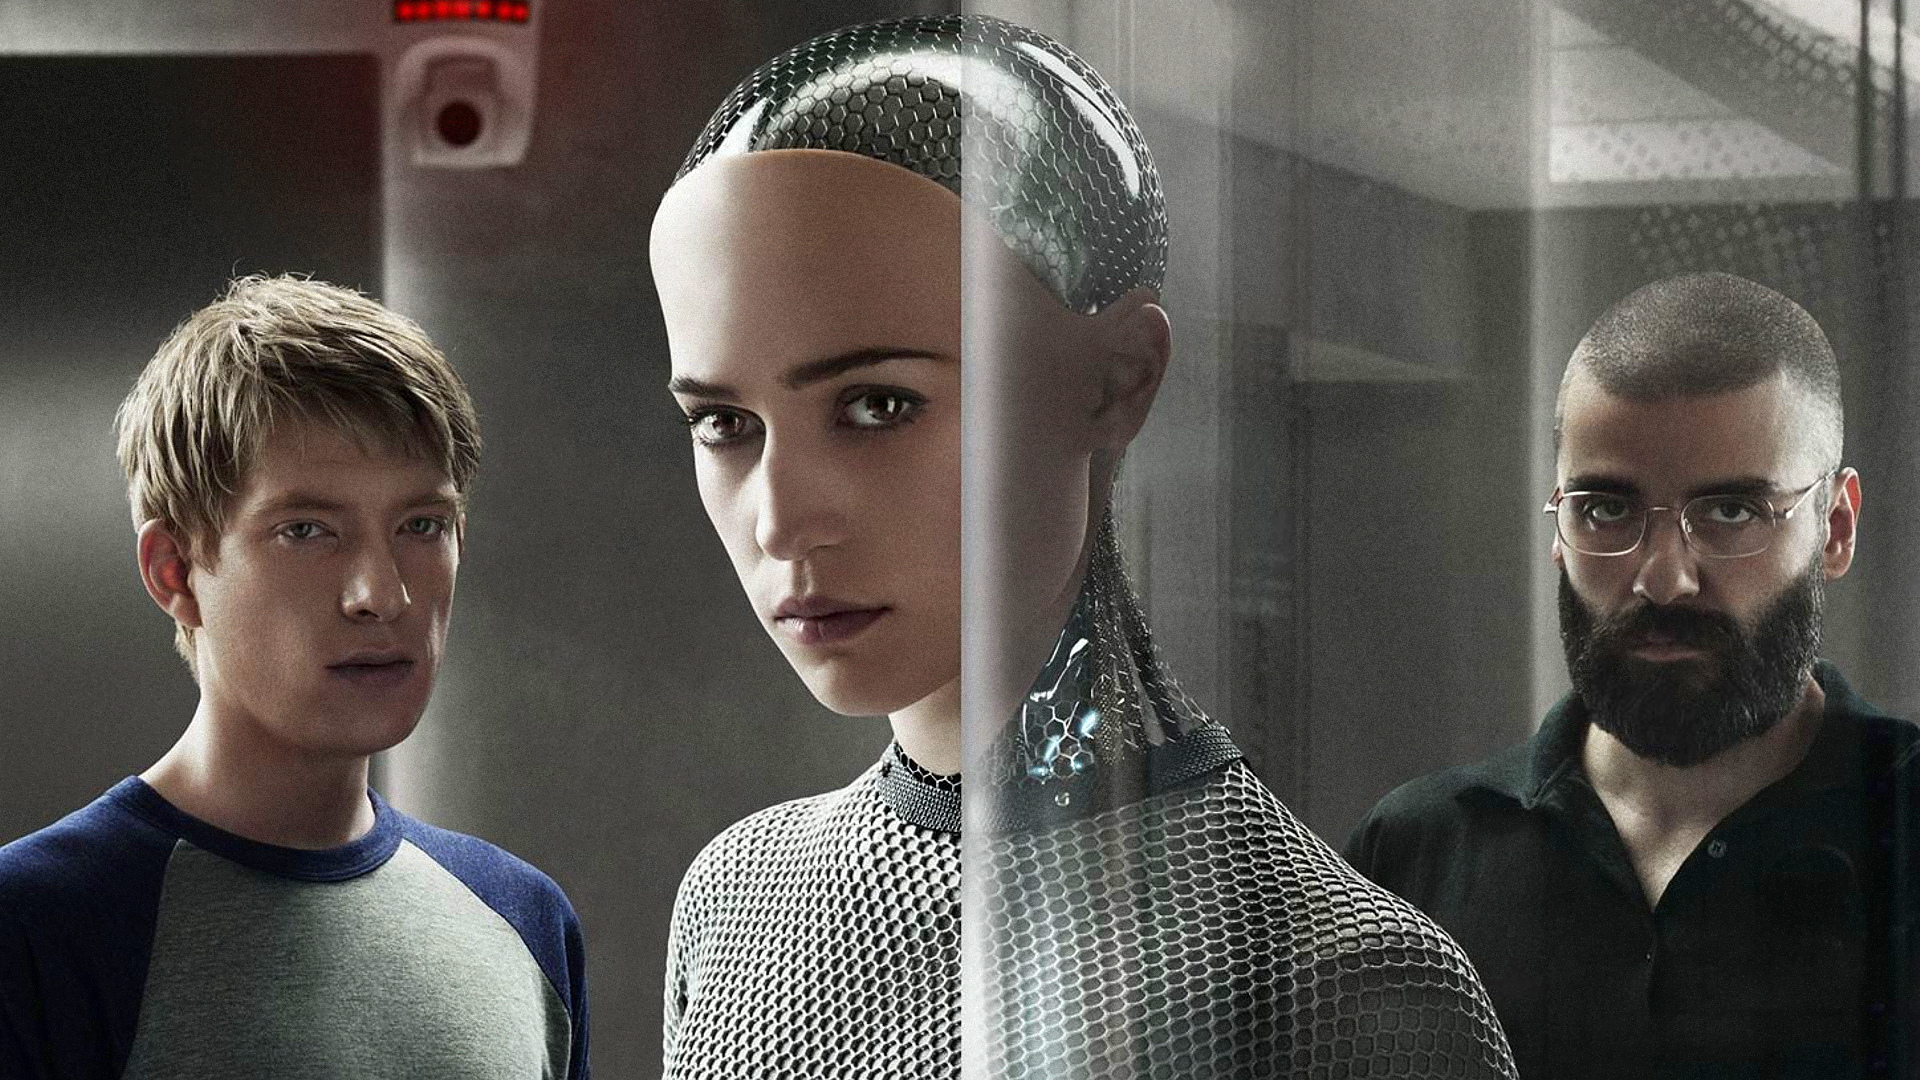 Amazing Ex Machina Pictures & Backgrounds